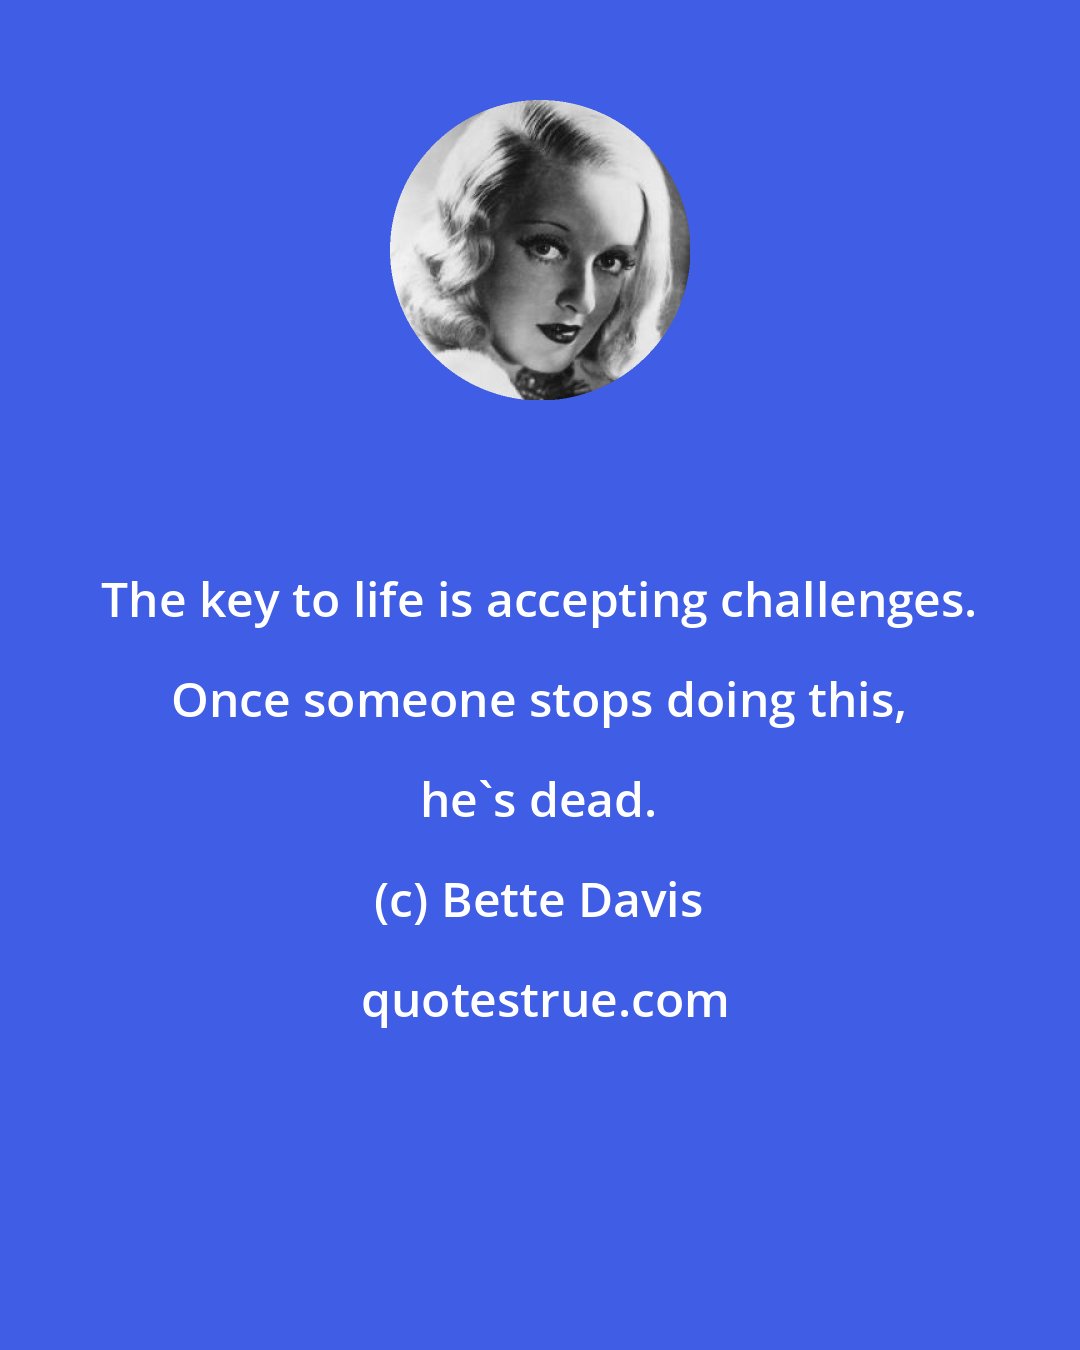 Bette Davis: The key to life is accepting challenges. Once someone stops doing this, he's dead.